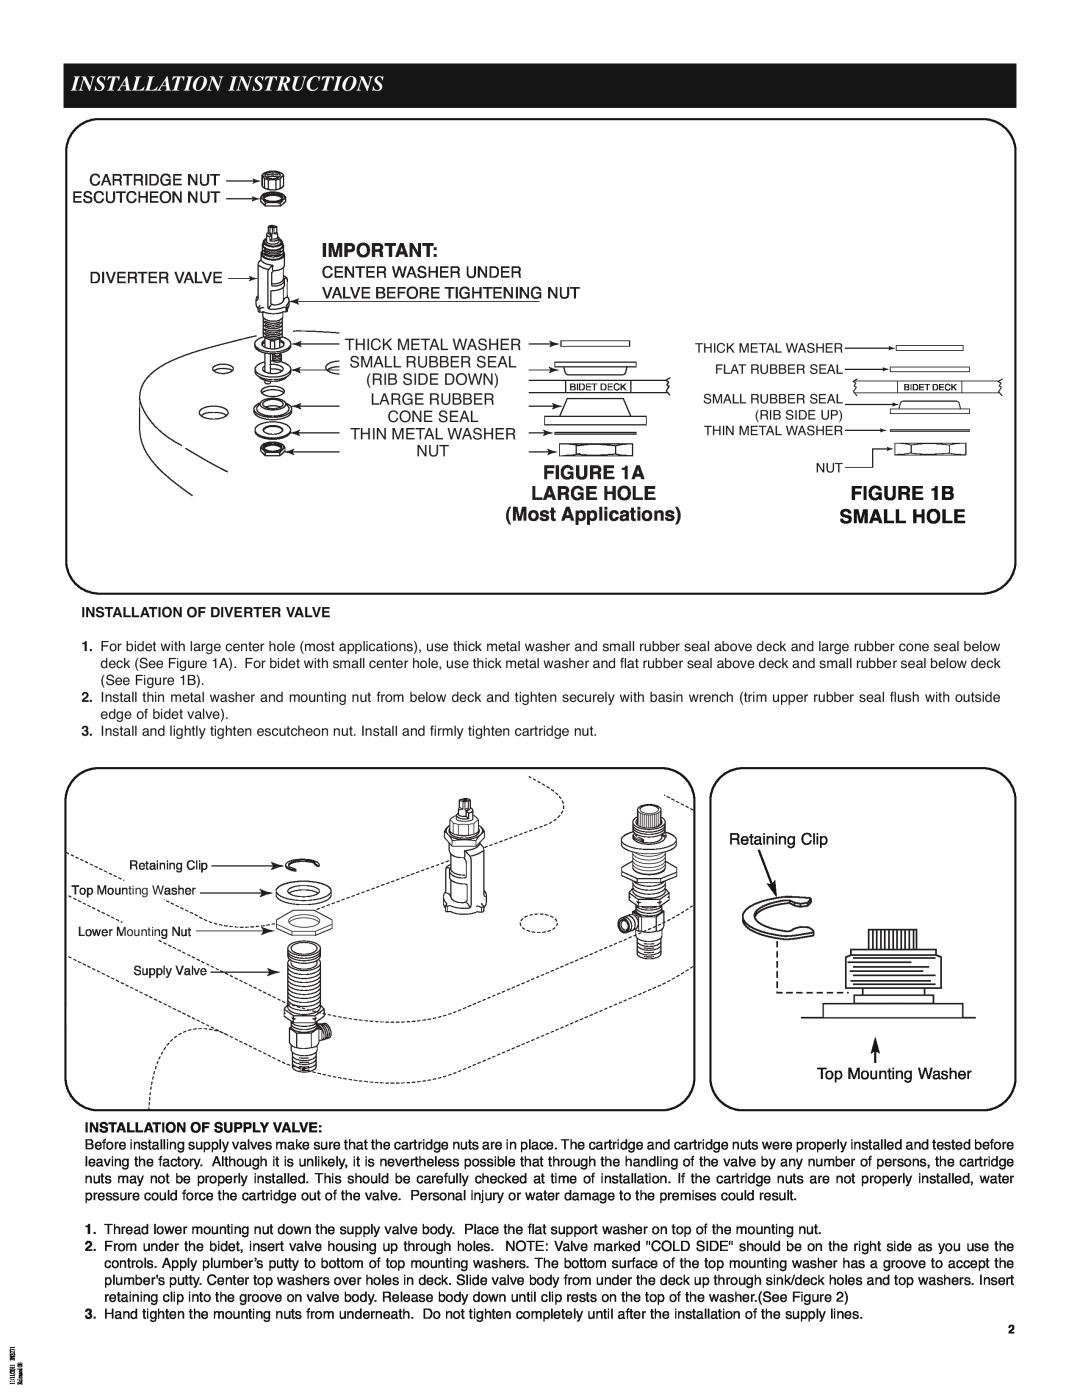 Moen 9200 Installation Instructions, Small Hole, Large Hole, B, Most Applications, Retaining Clip, Top Mounting Washer 